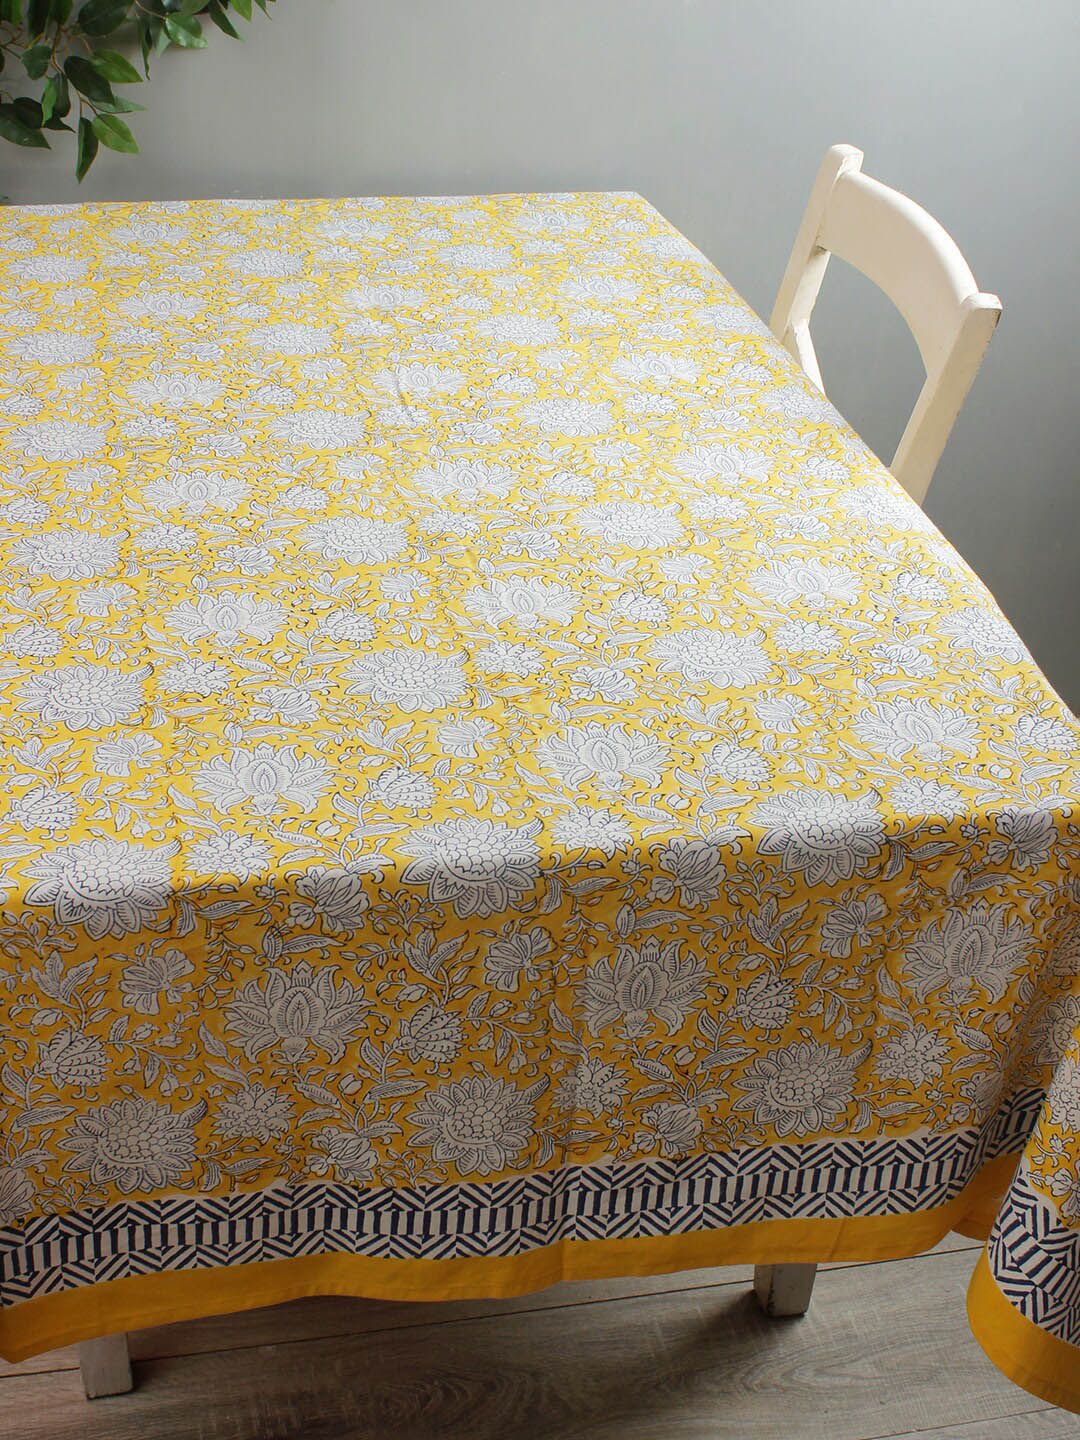 Rajasthan Decor Yellow & White Floral Printed 6 Seater Table Cover Price in India